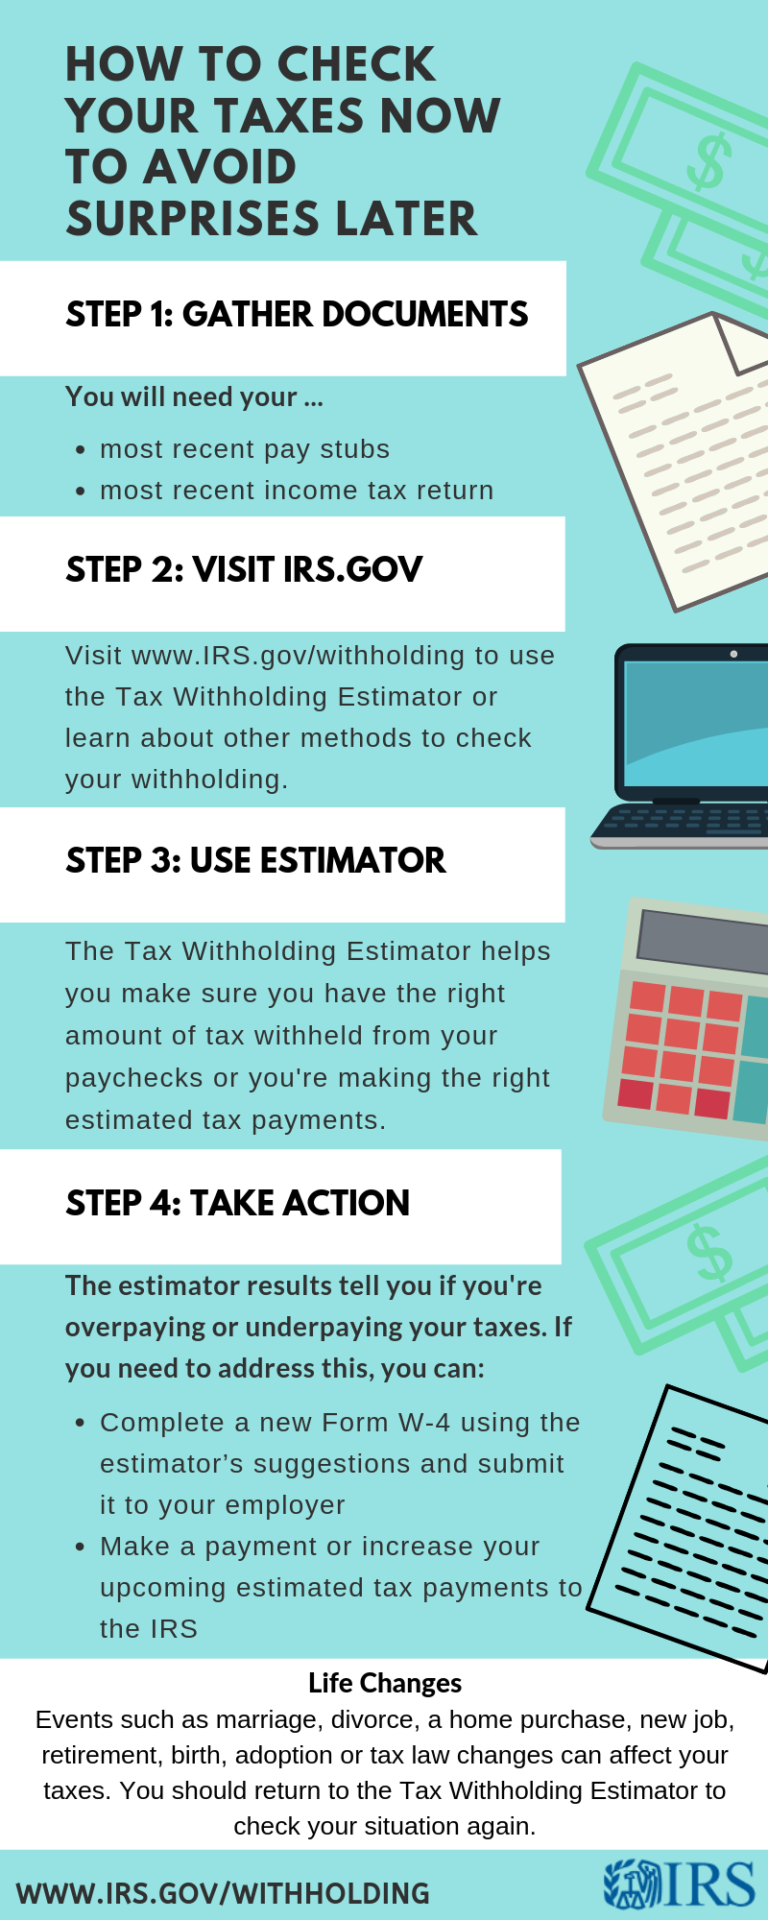 tax-withholding-estimator-2022-federal-withholding-tables-2021